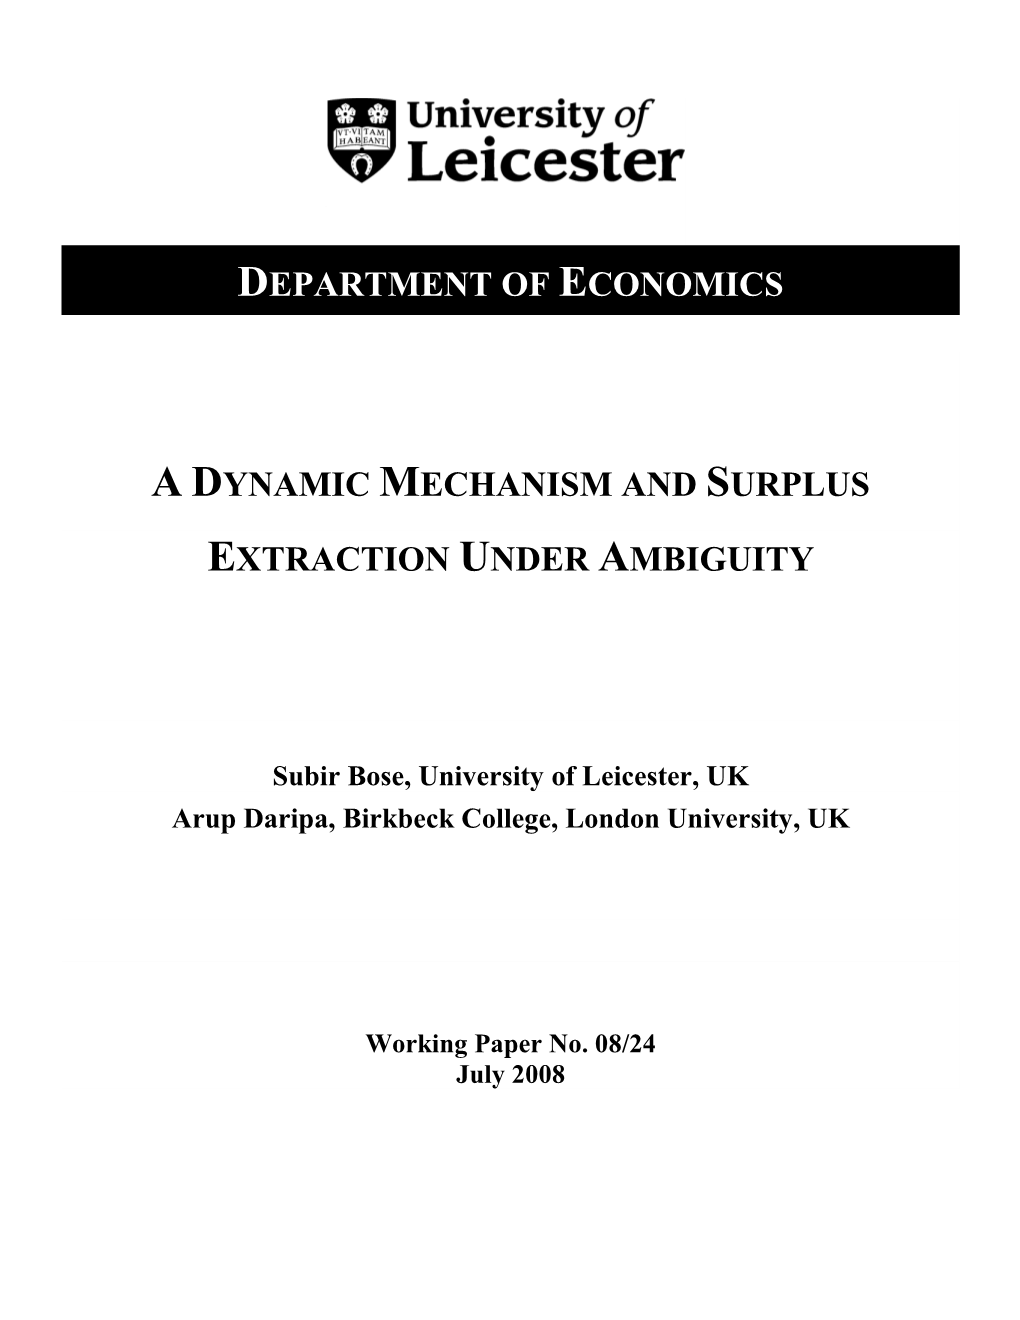 Adynamic MECHANISM and SURPLUS EXTRACTION UNDER